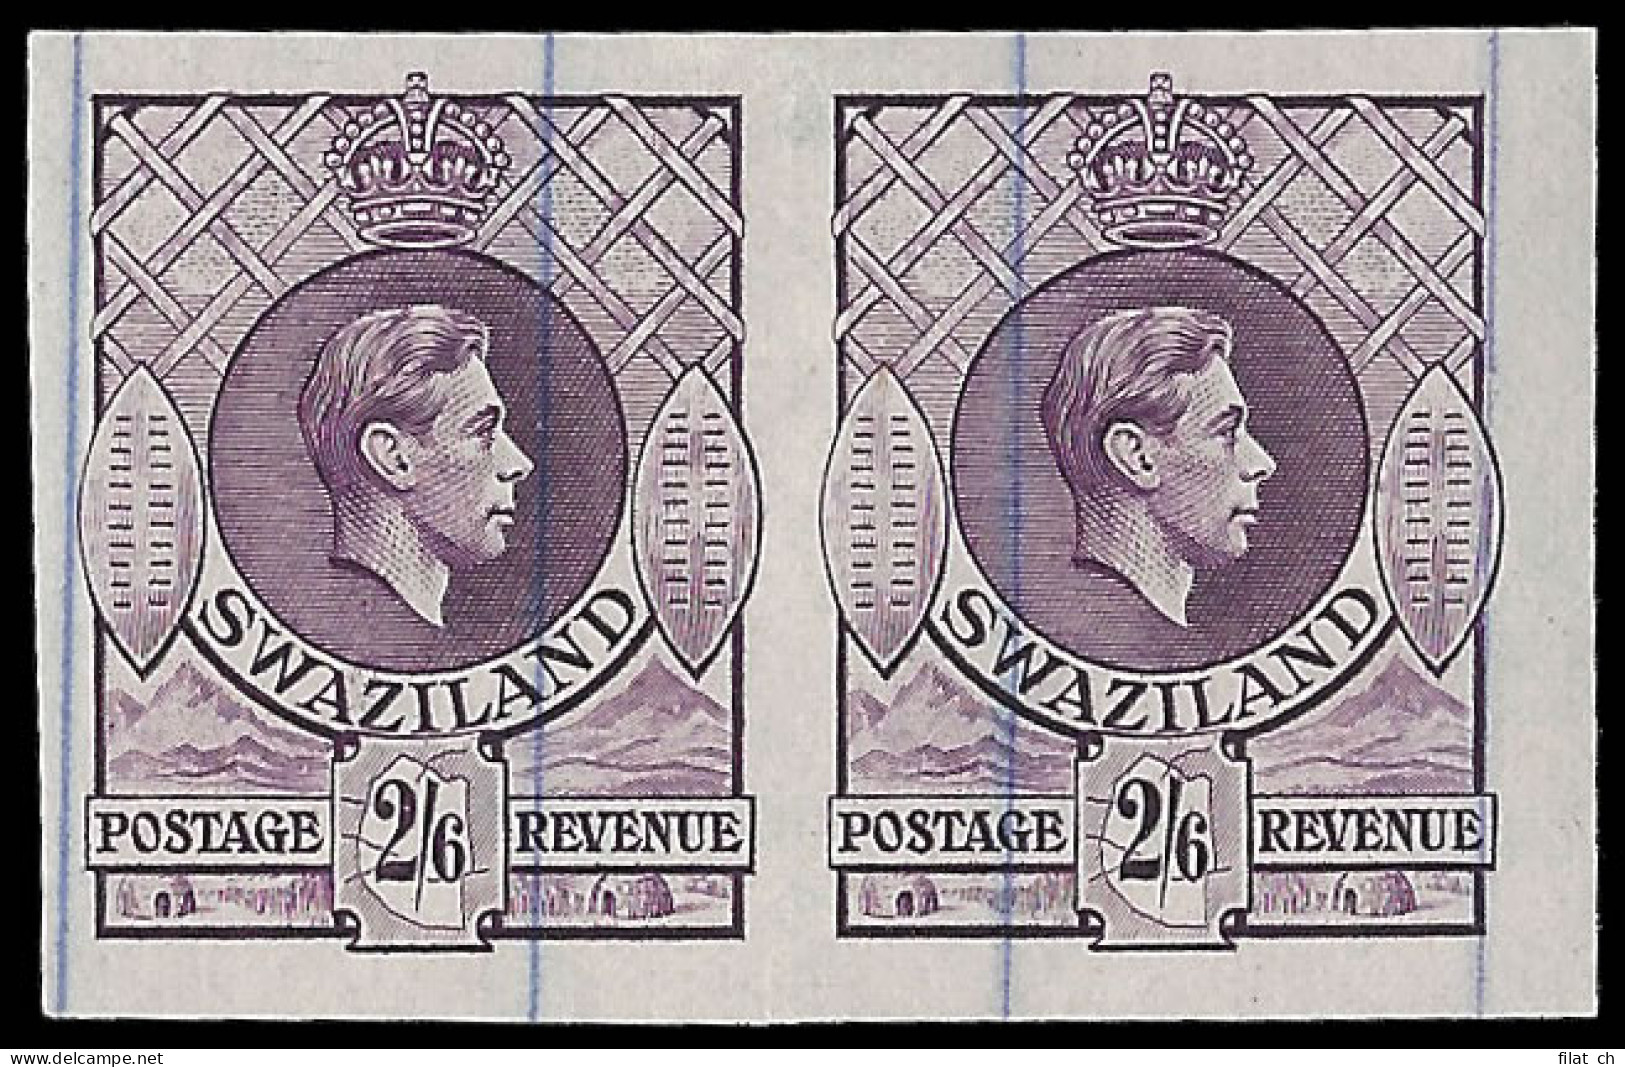 Swaziland 1938 KGVI 2/6 Imperf Printer's Working Plate Proofs - Swaziland (...-1967)